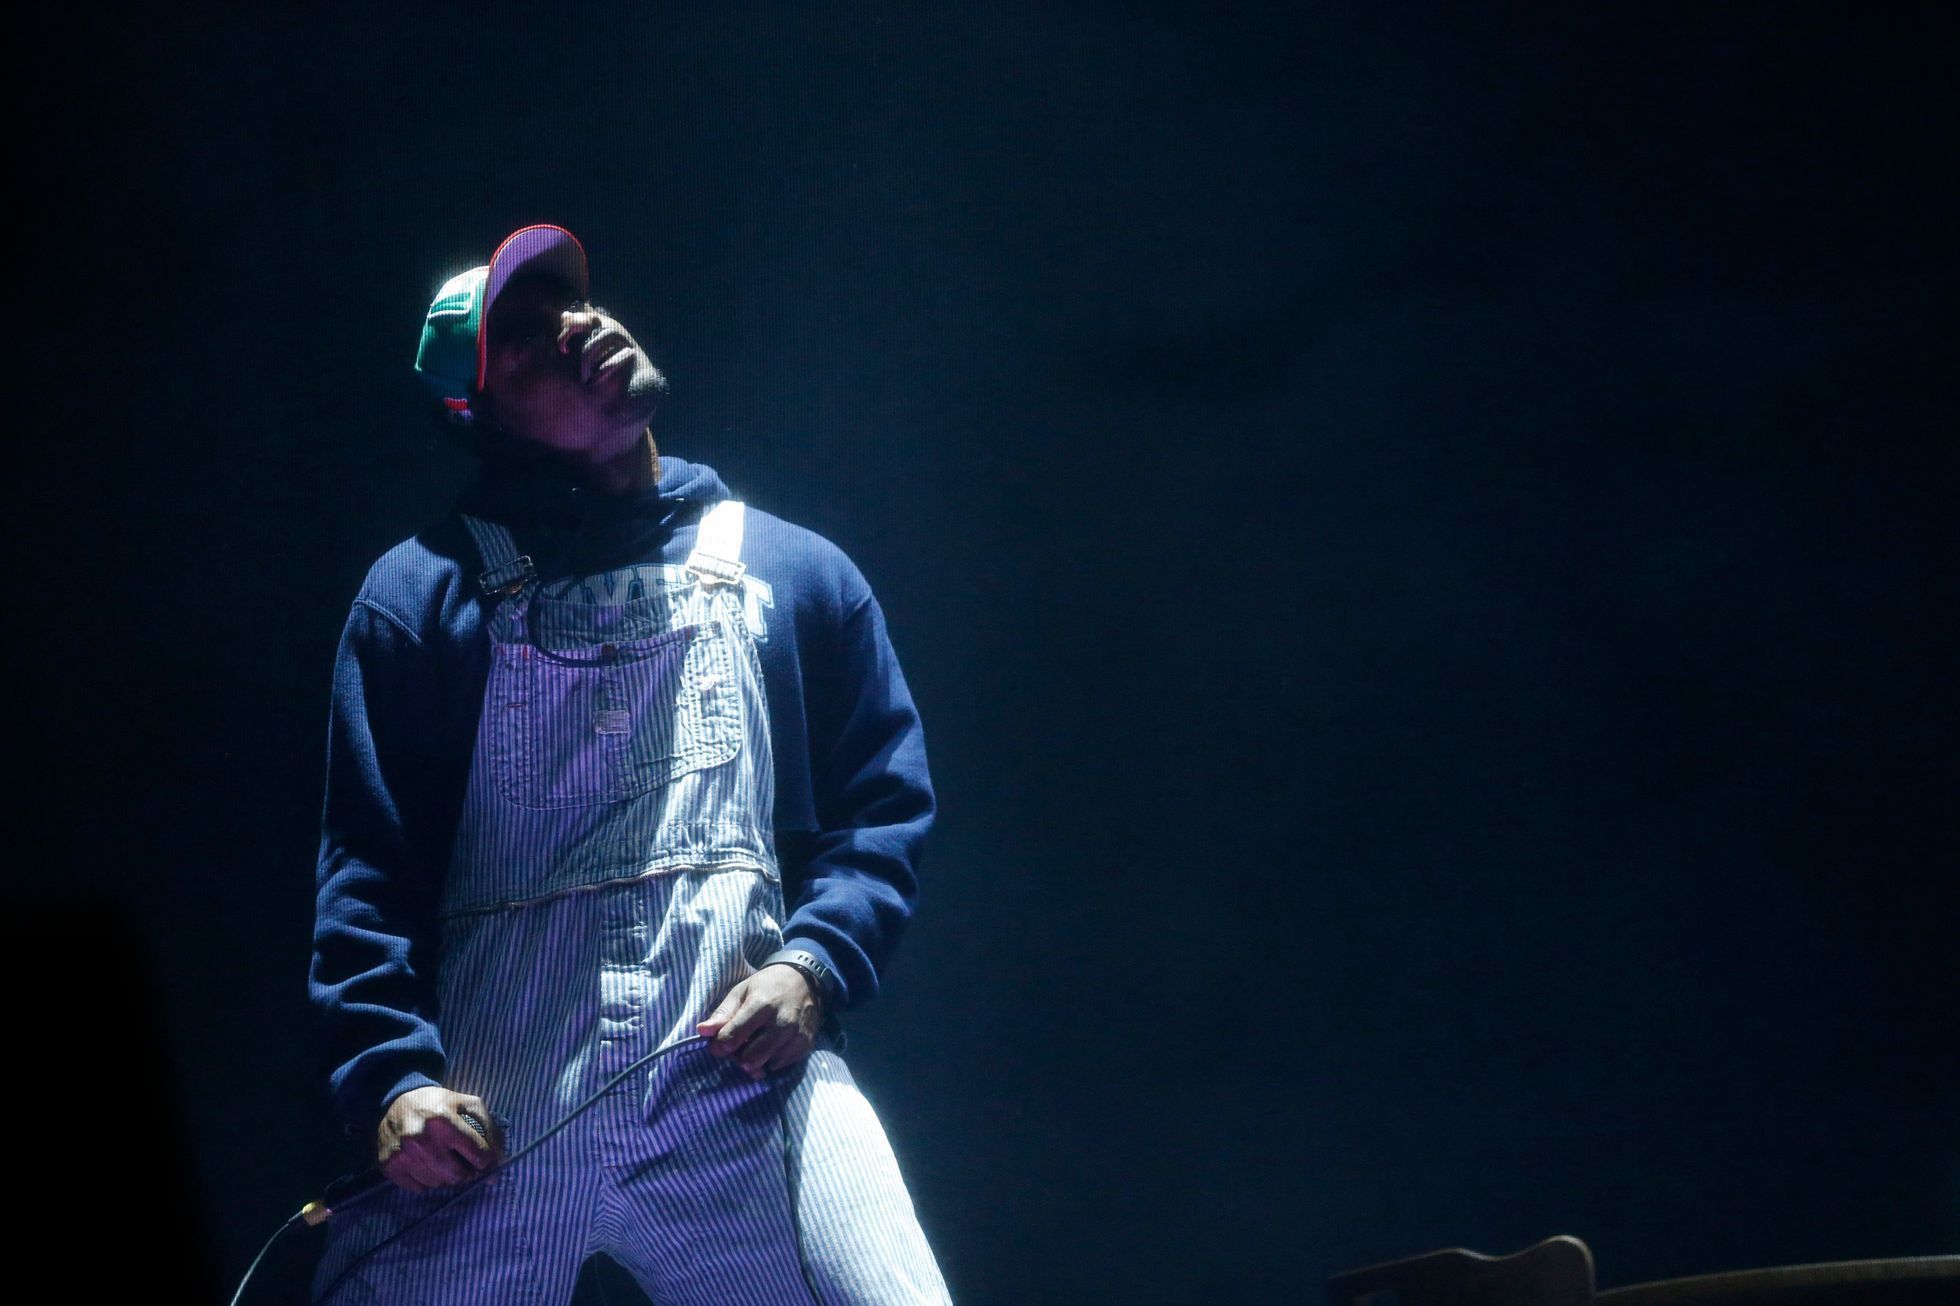 Andre 3000 of Outkast performs at the Coachella Valley Music and Arts Festival in Indio